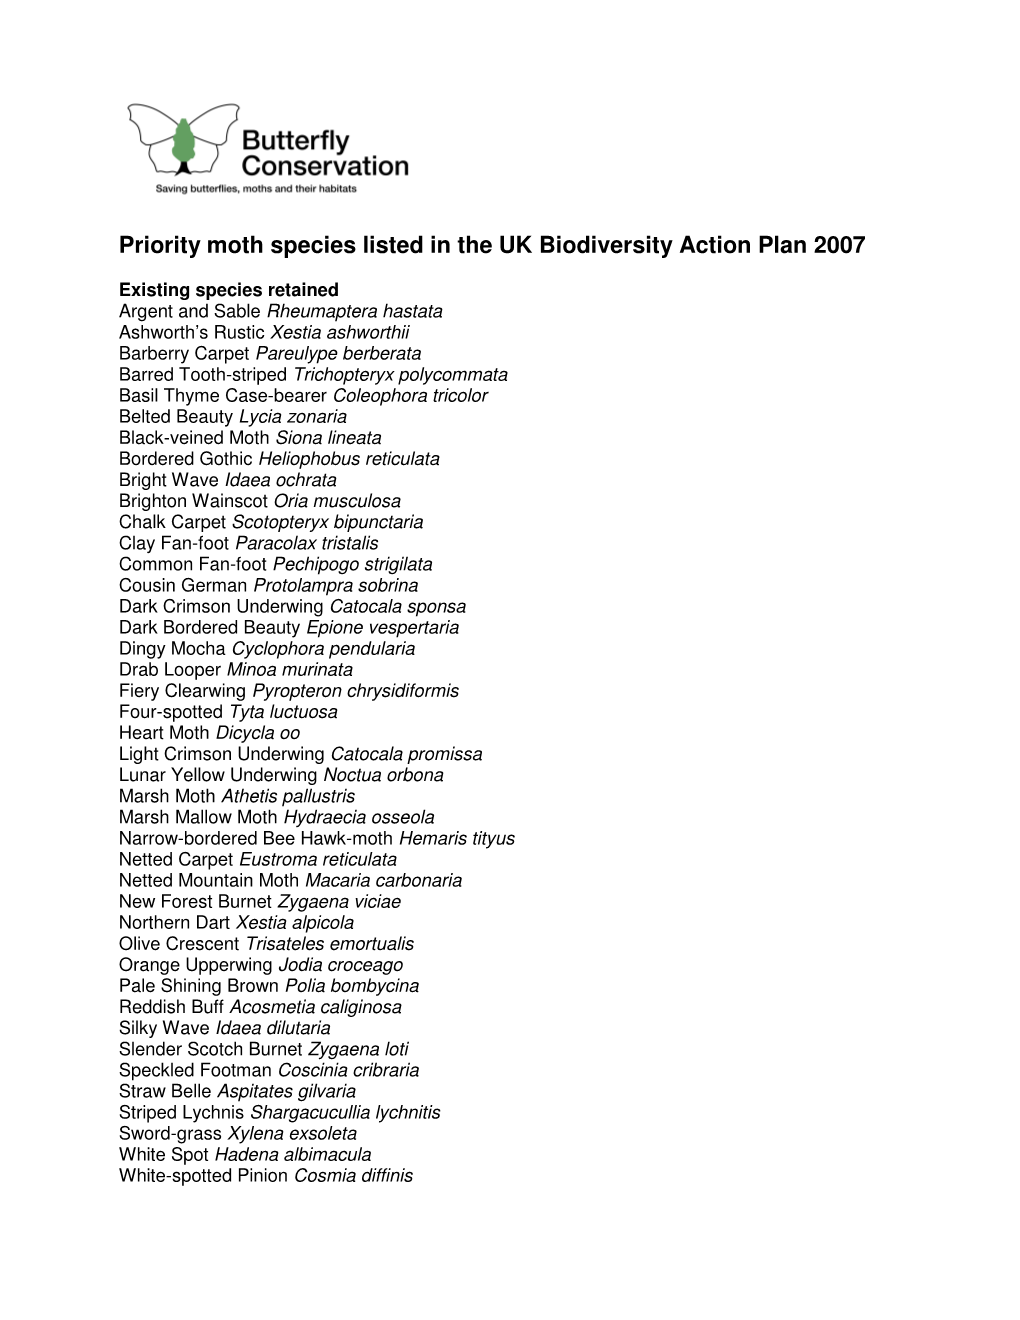 Priority Moth Species Listed in the UK Biodiversity Action Plan 2007